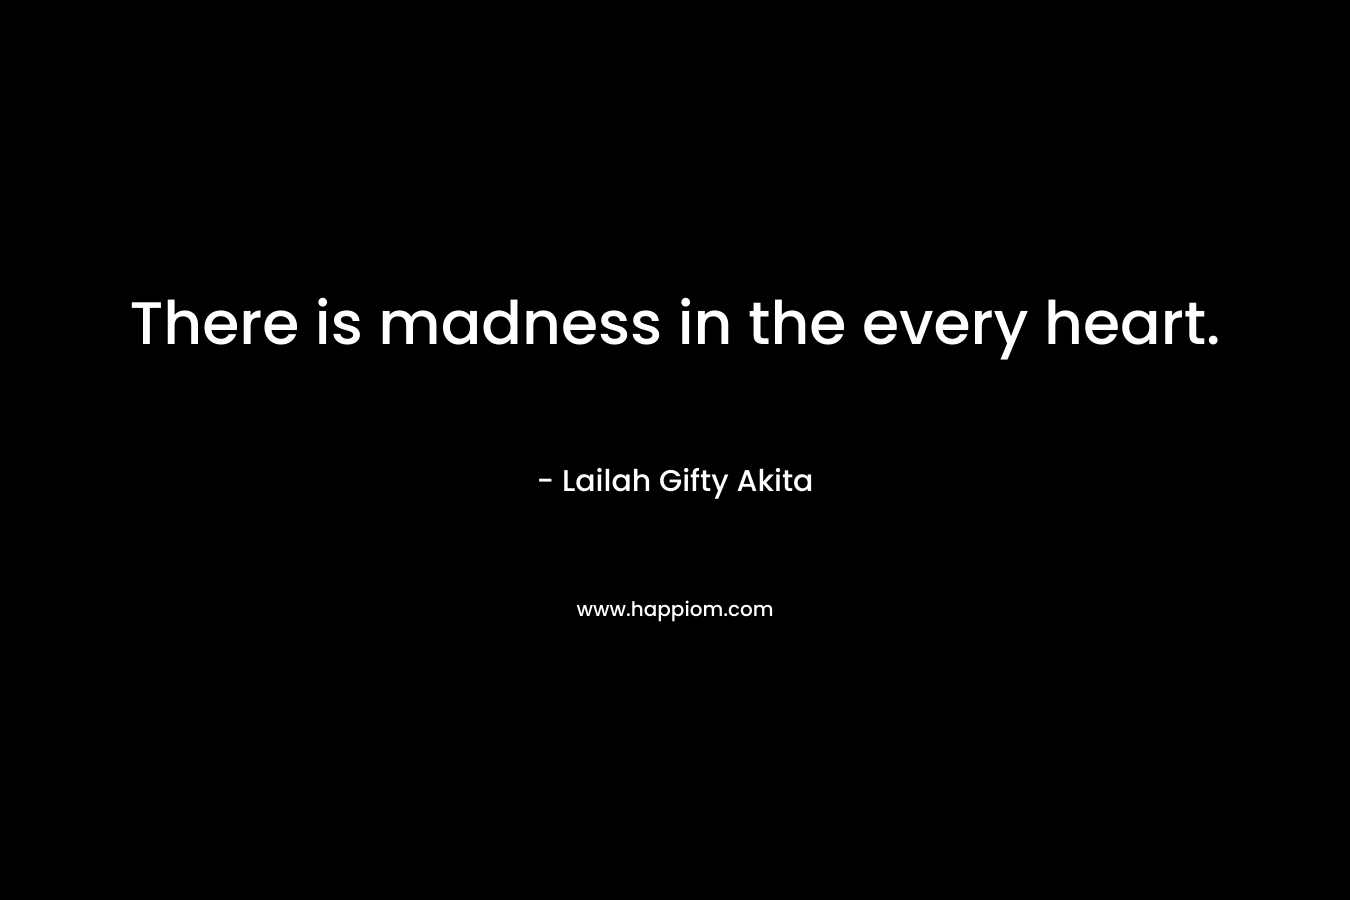 There is madness in the every heart.